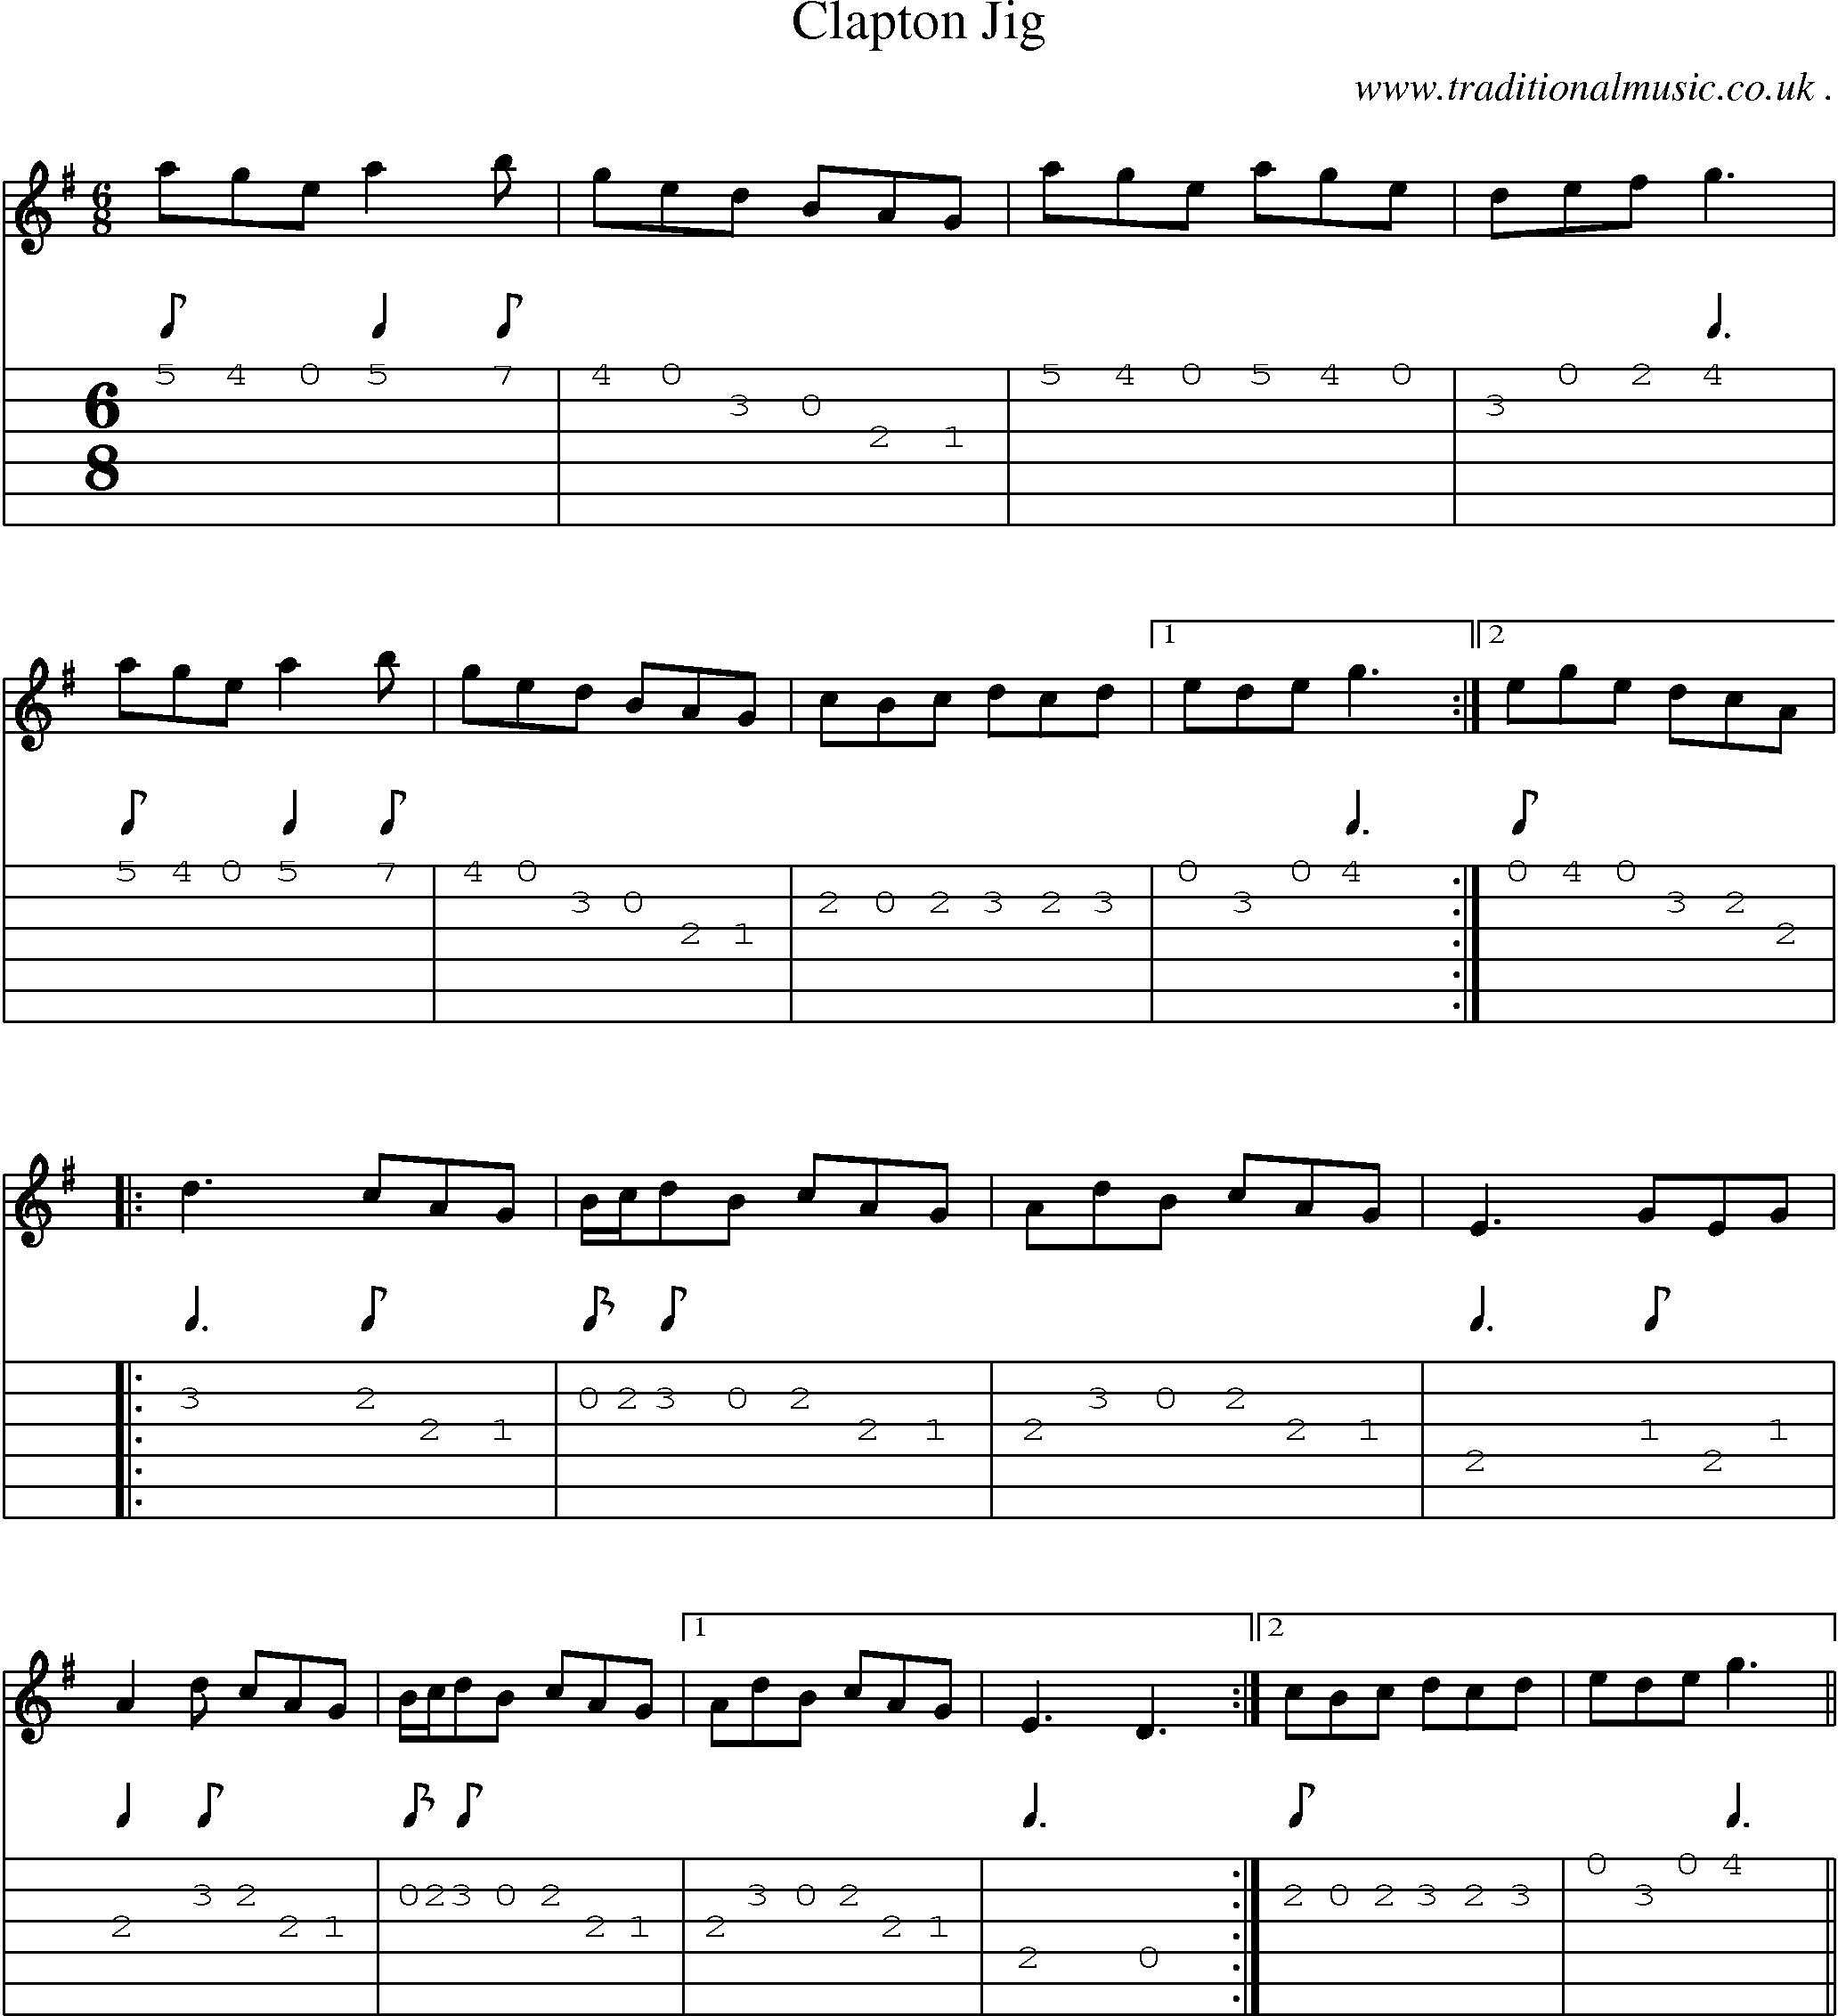 Sheet-Music and Guitar Tabs for Clapton Jig